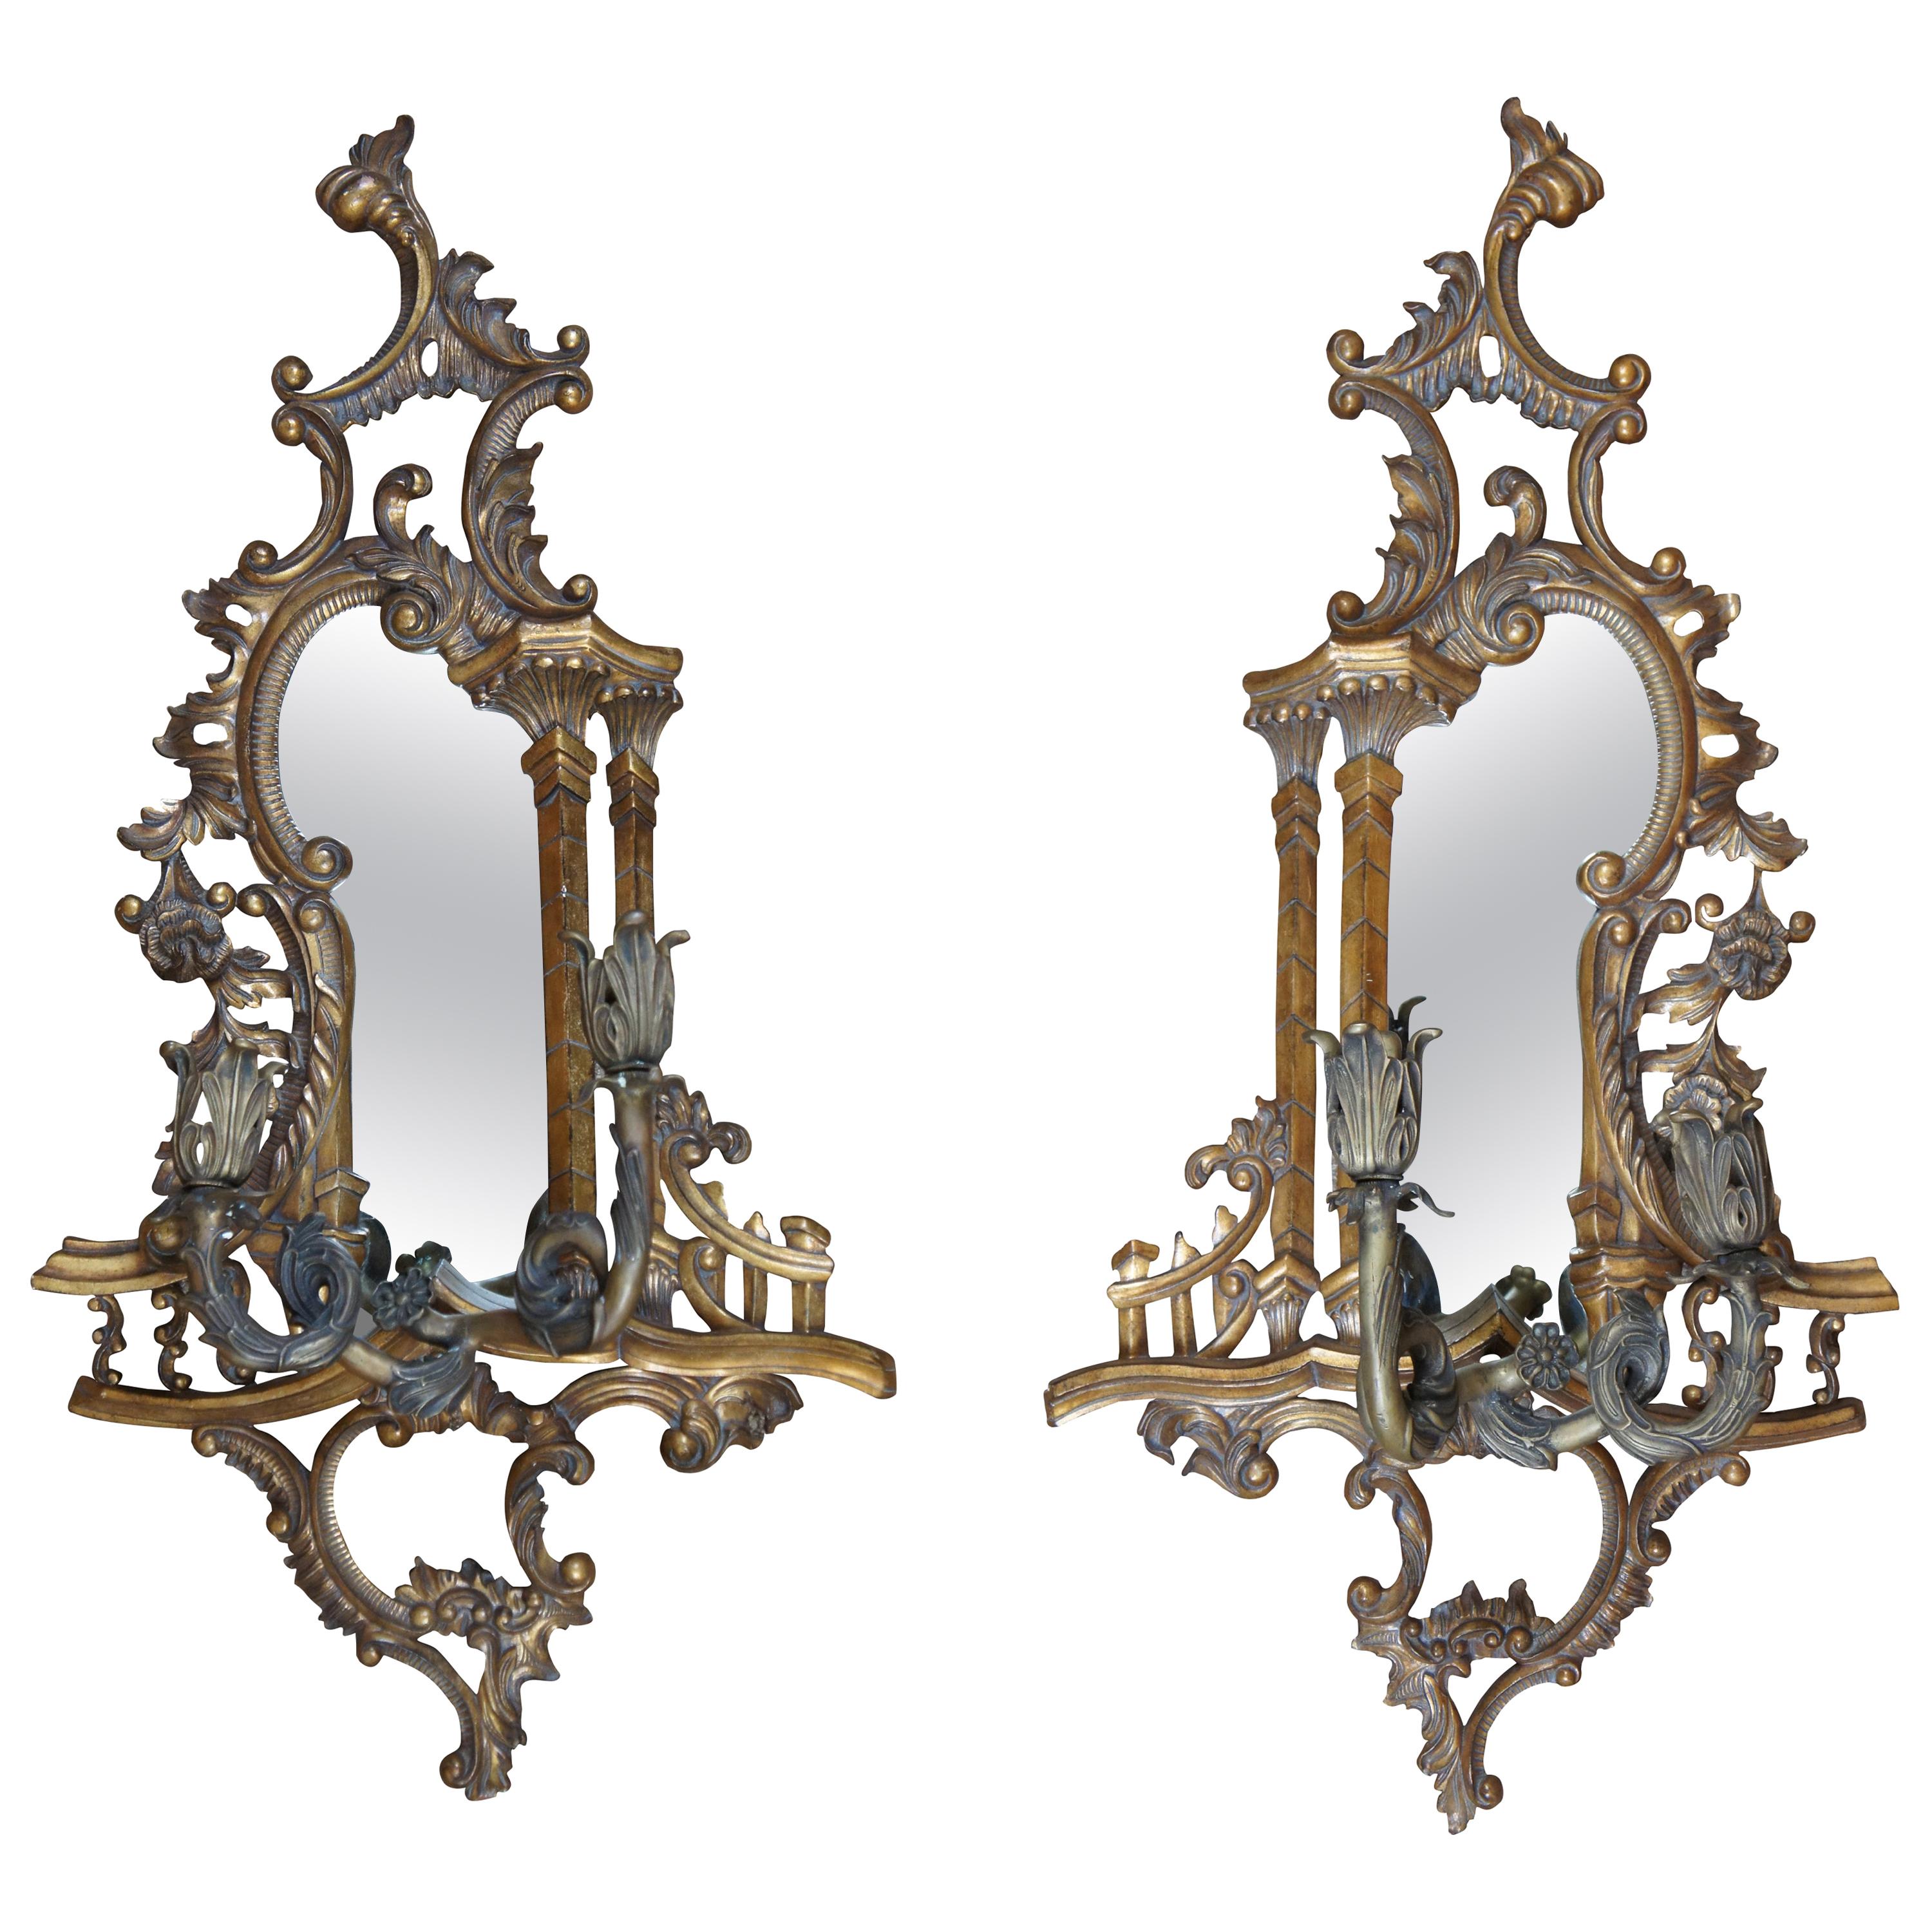 2 Maitland Smith Baroque Rococo Mirrored Wall Sconces Ornate Candleholders